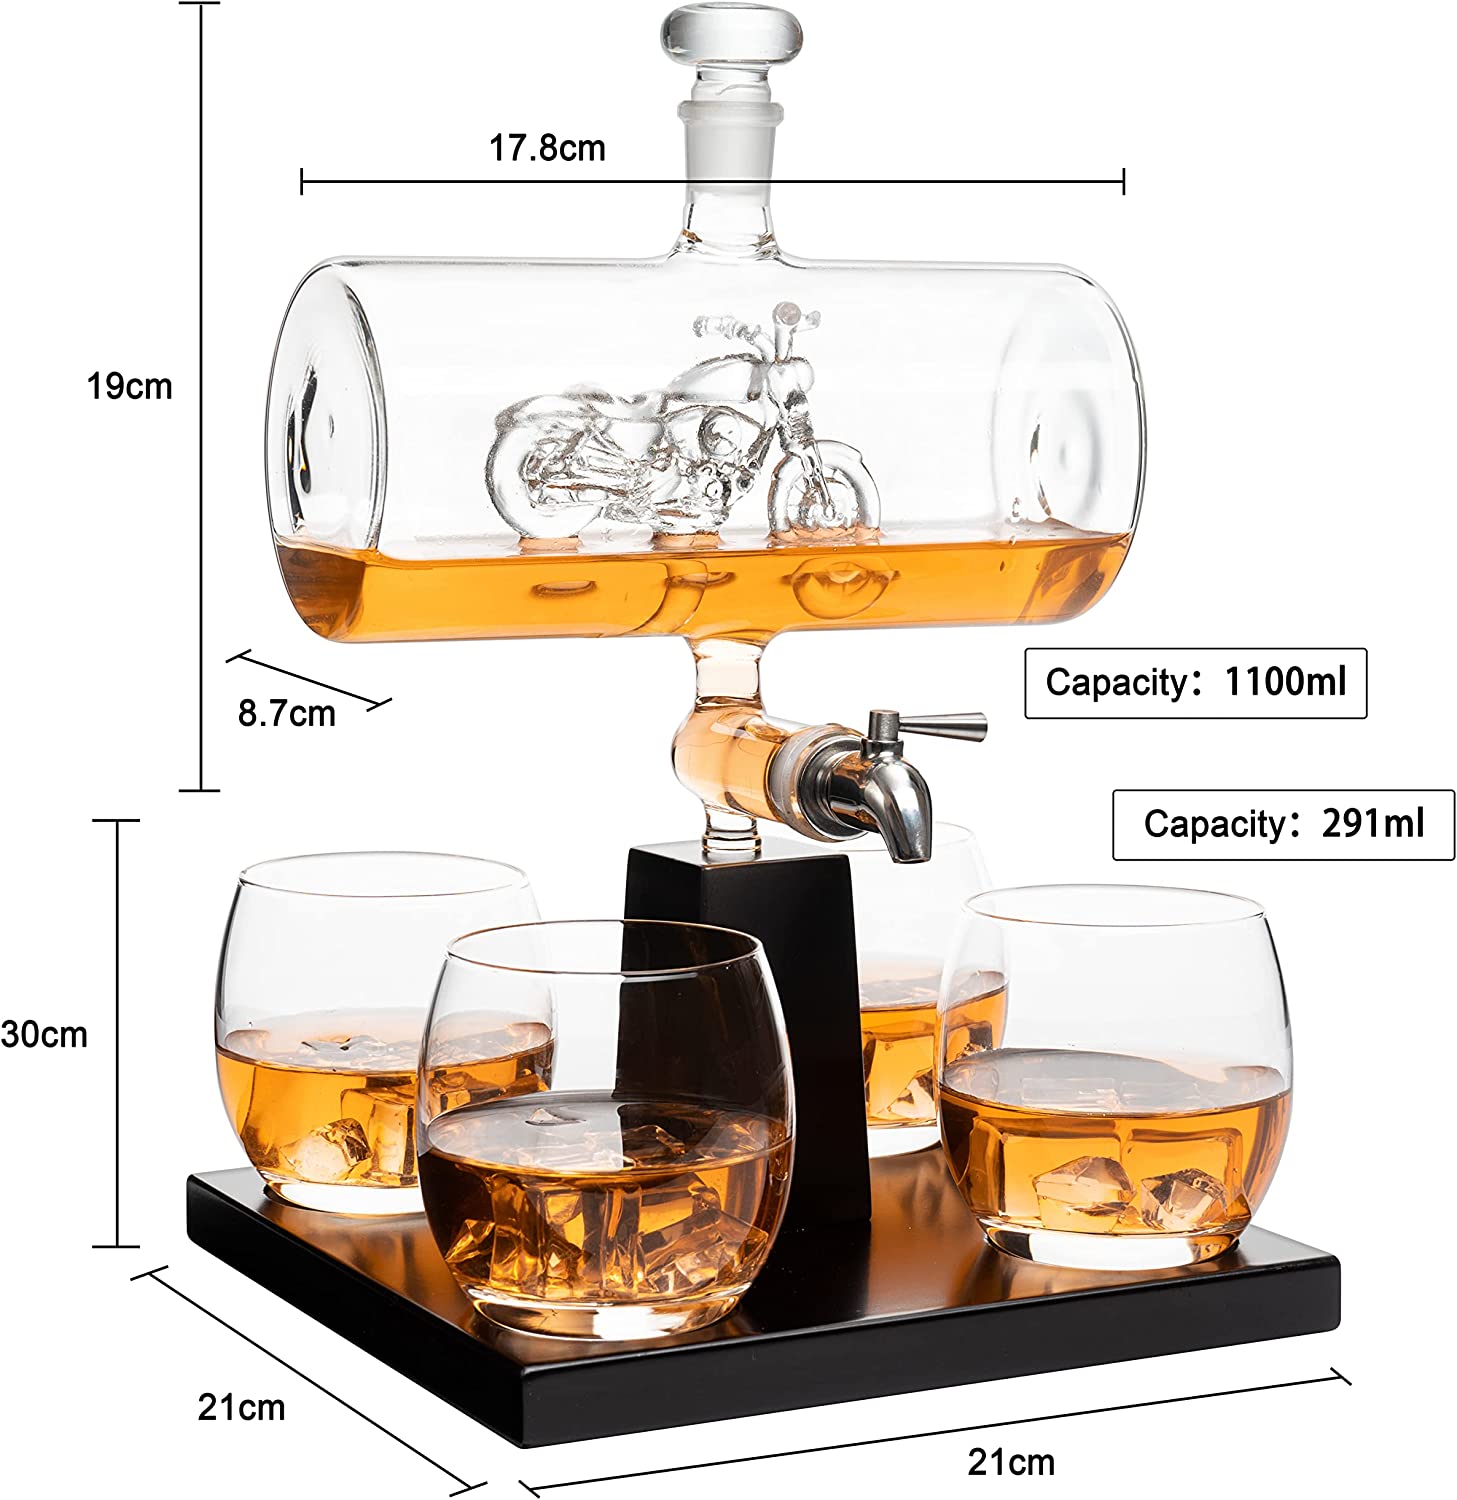 Motorcycle Decanter Whiskey & Wine Decanter Set 1100ml by The Wine Savant with 4 Whiskey Glasses, Motorcycle Gifts, Harley Davidson Motorbike Gifts, Drink Dispenser for Wine, Scotch, Bourbon 19"H 8"W-5